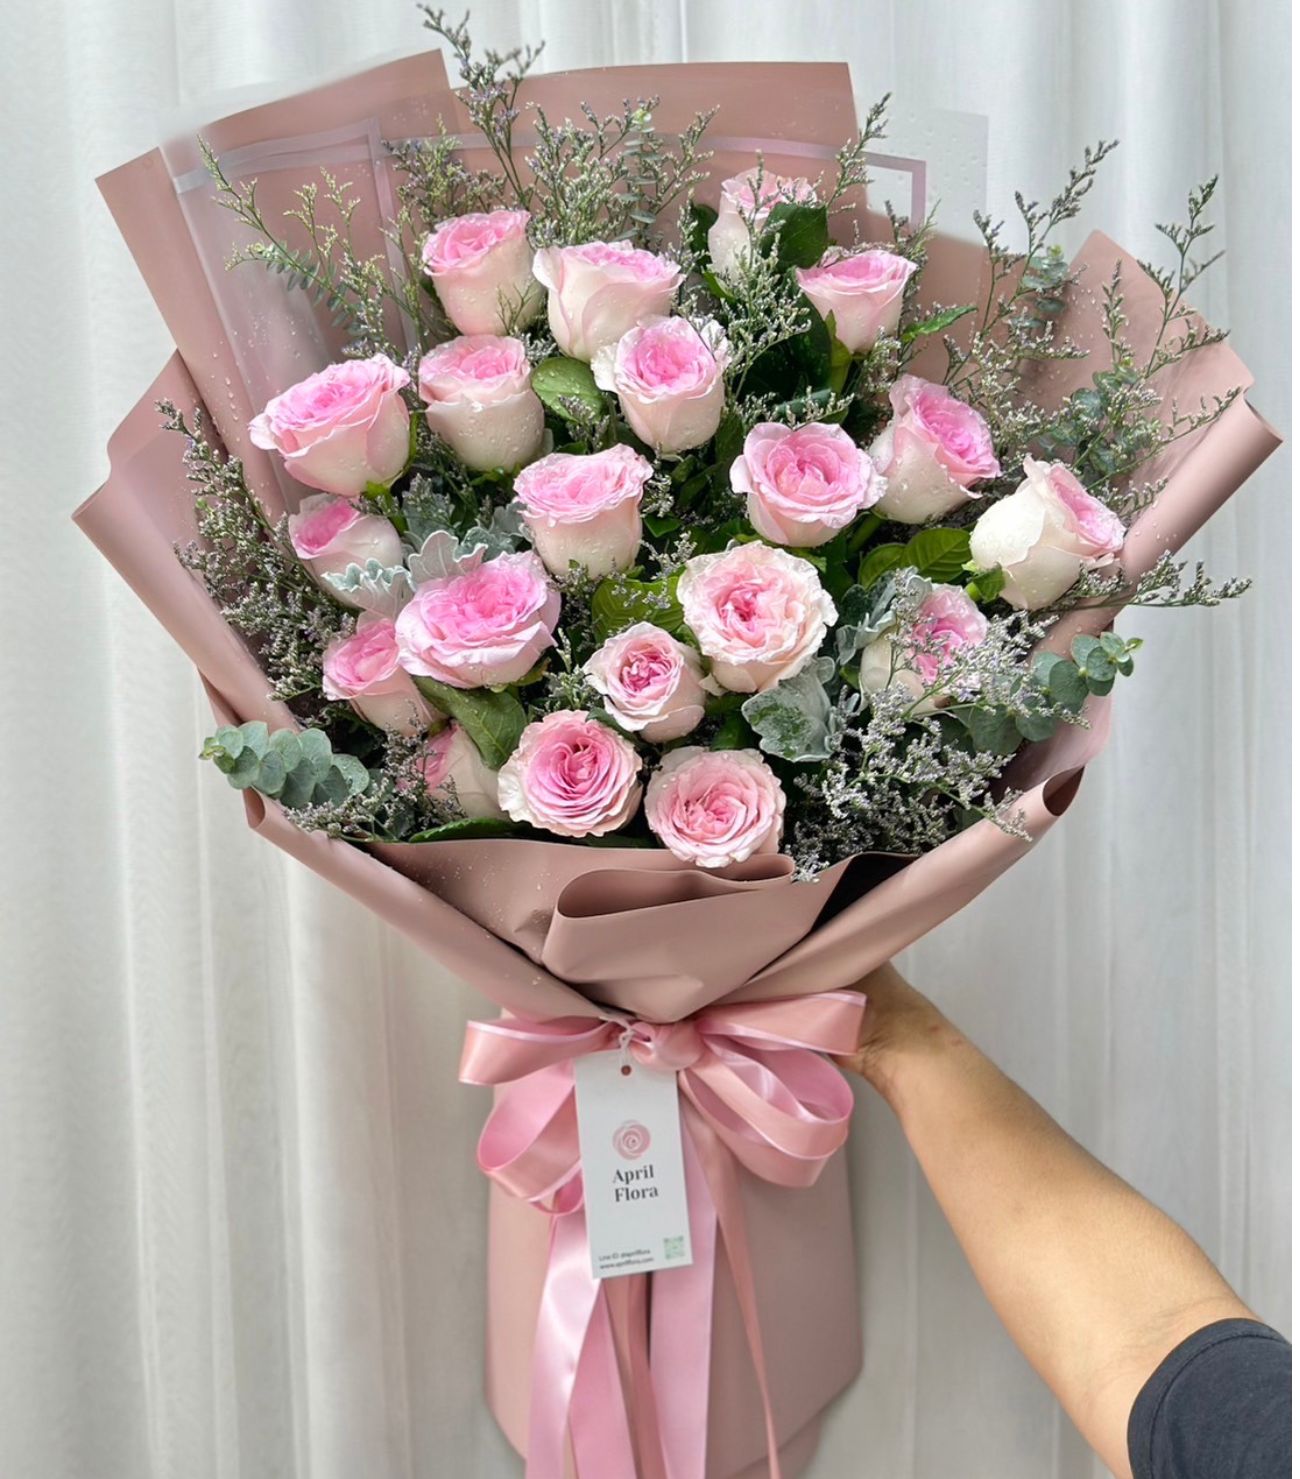 "Adore" Bouquet Of 20 Pink Roses With Caspia - Phuket